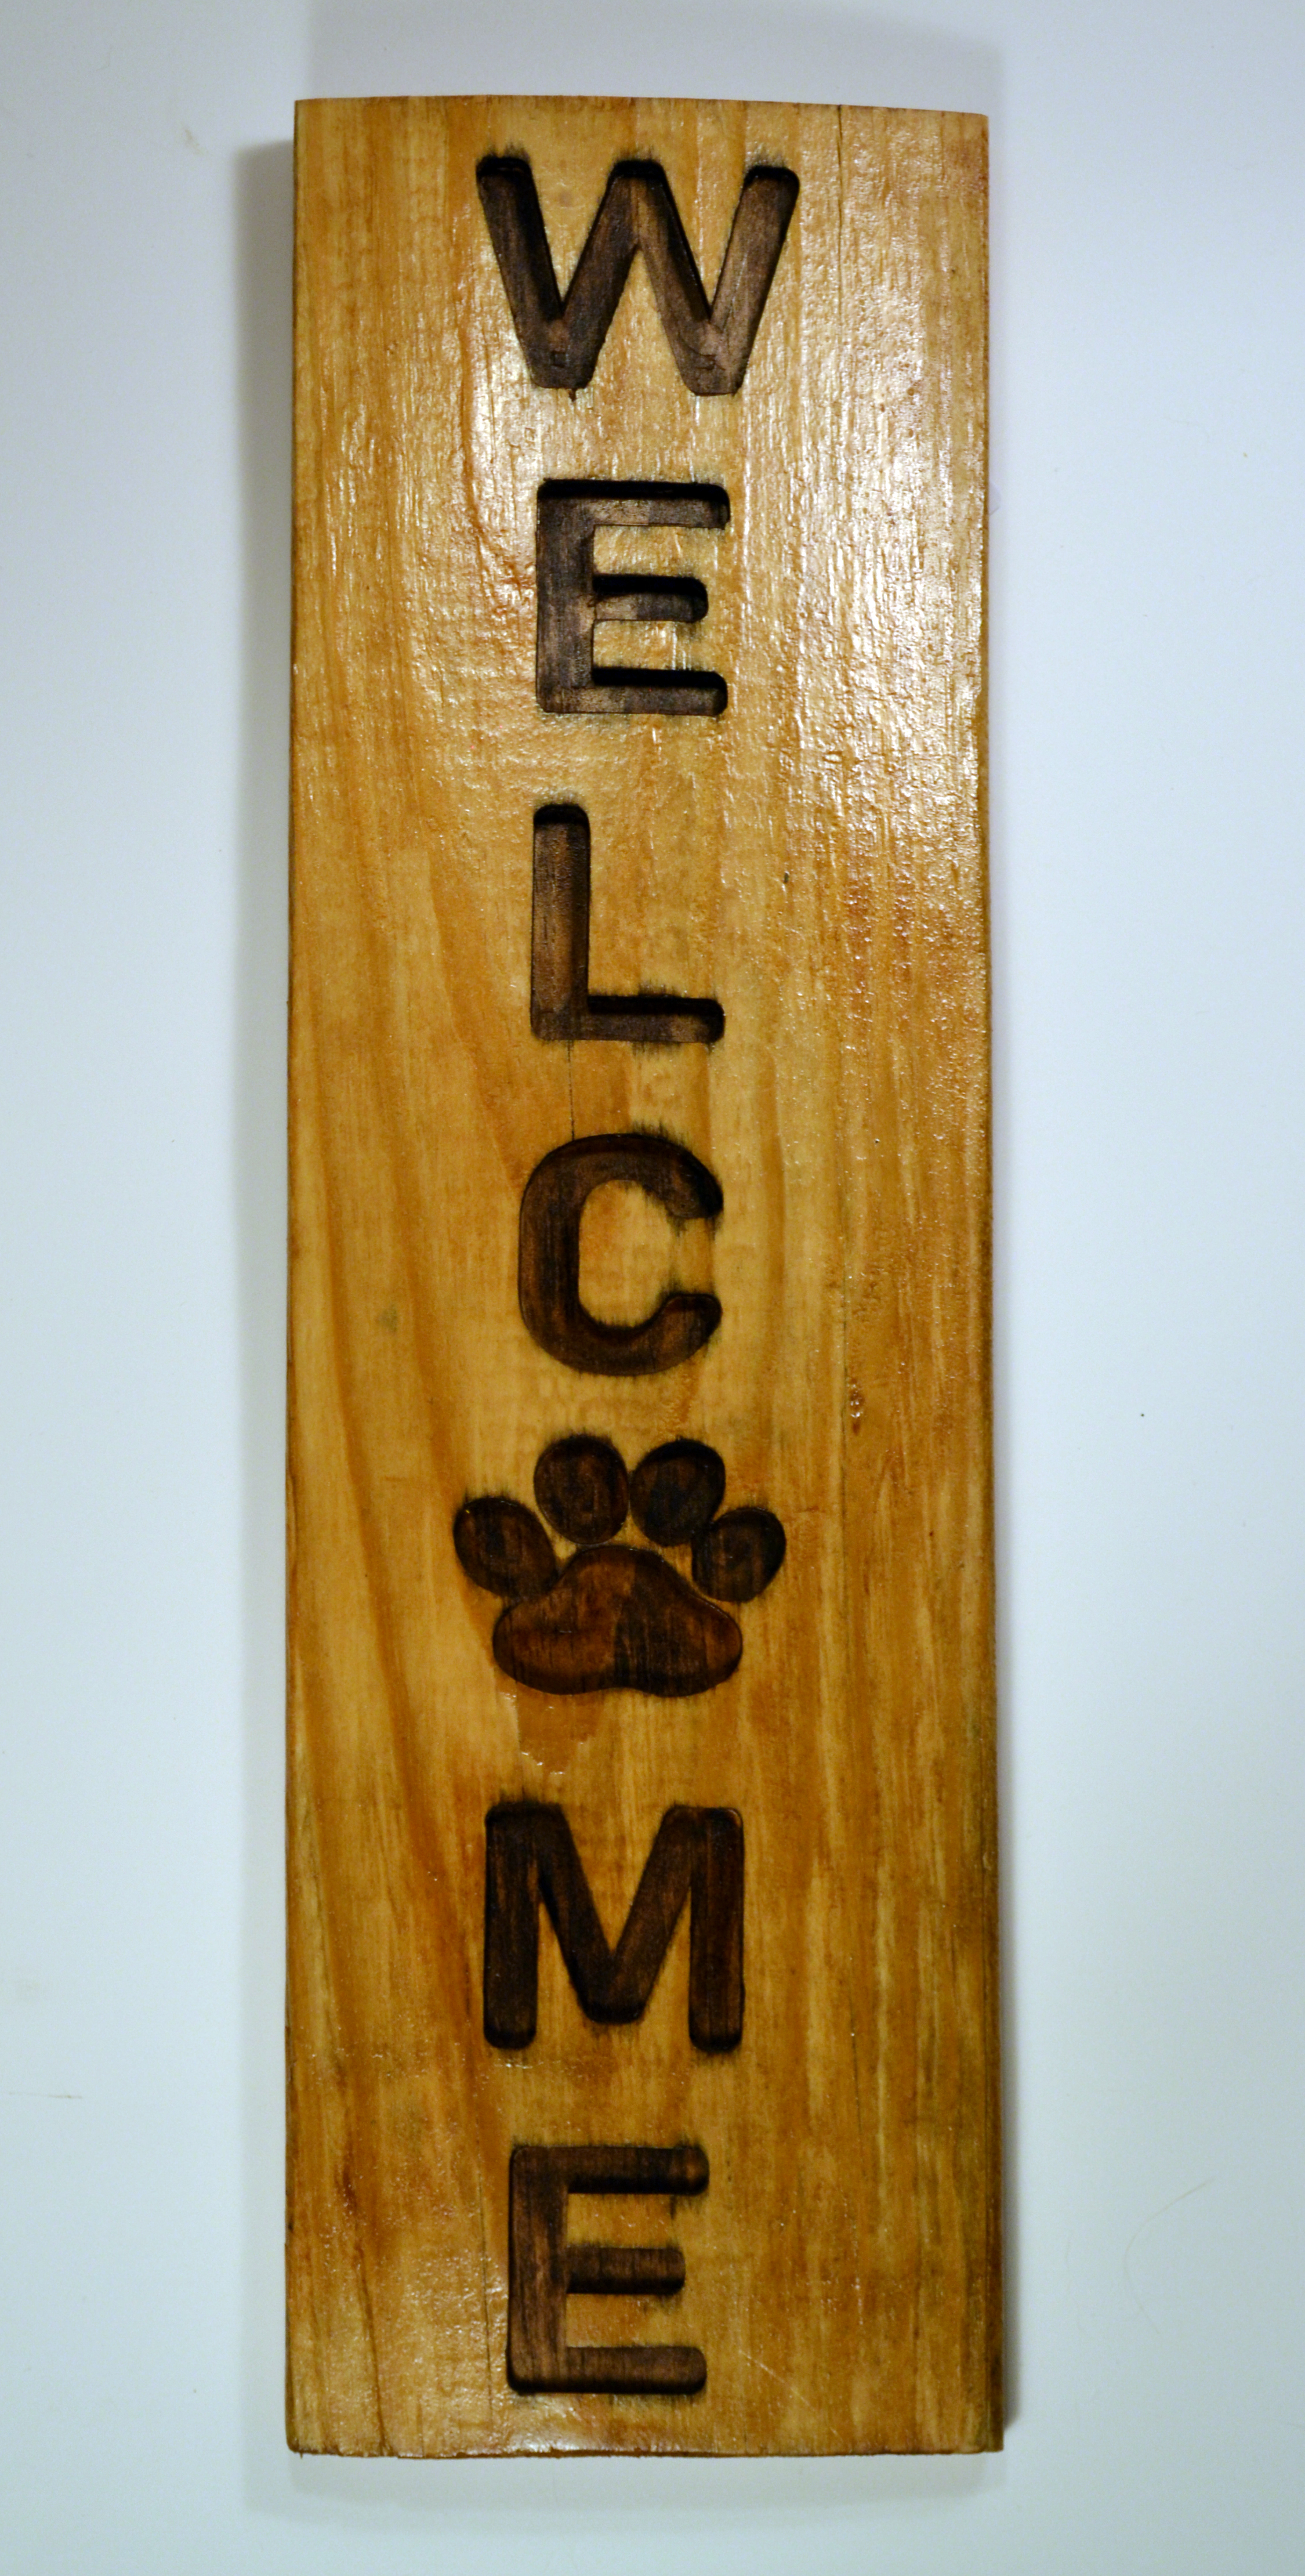  cnc carved welcome sign with paw print